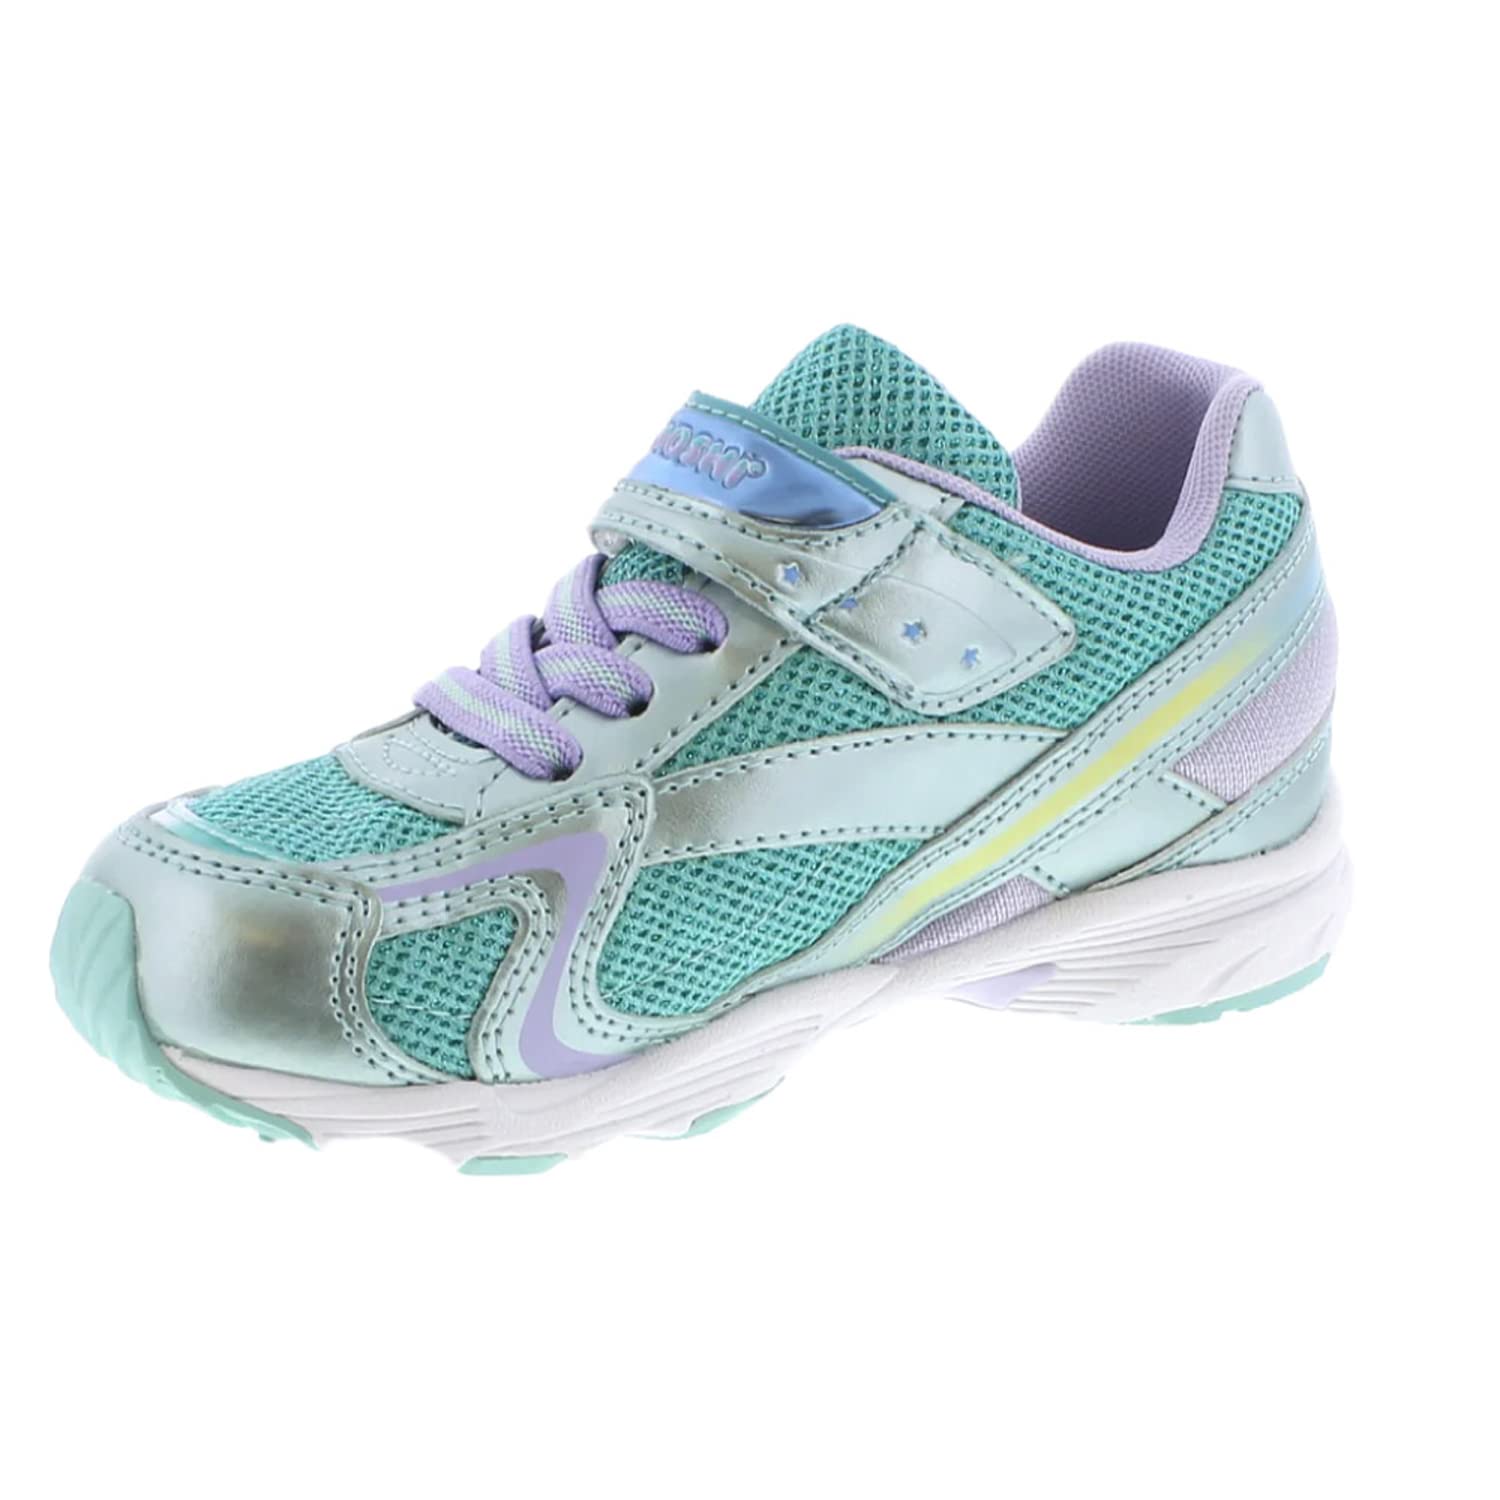 TSUKIHOSHI 3537 Glitz Strap-Closure Machine-Washable Child Sneaker Shoe with Wide Toe Box and Slip-Resistant, Non-Marking Outsole, Mint/Lavender - 9.5 Toddler (1-4 Years)